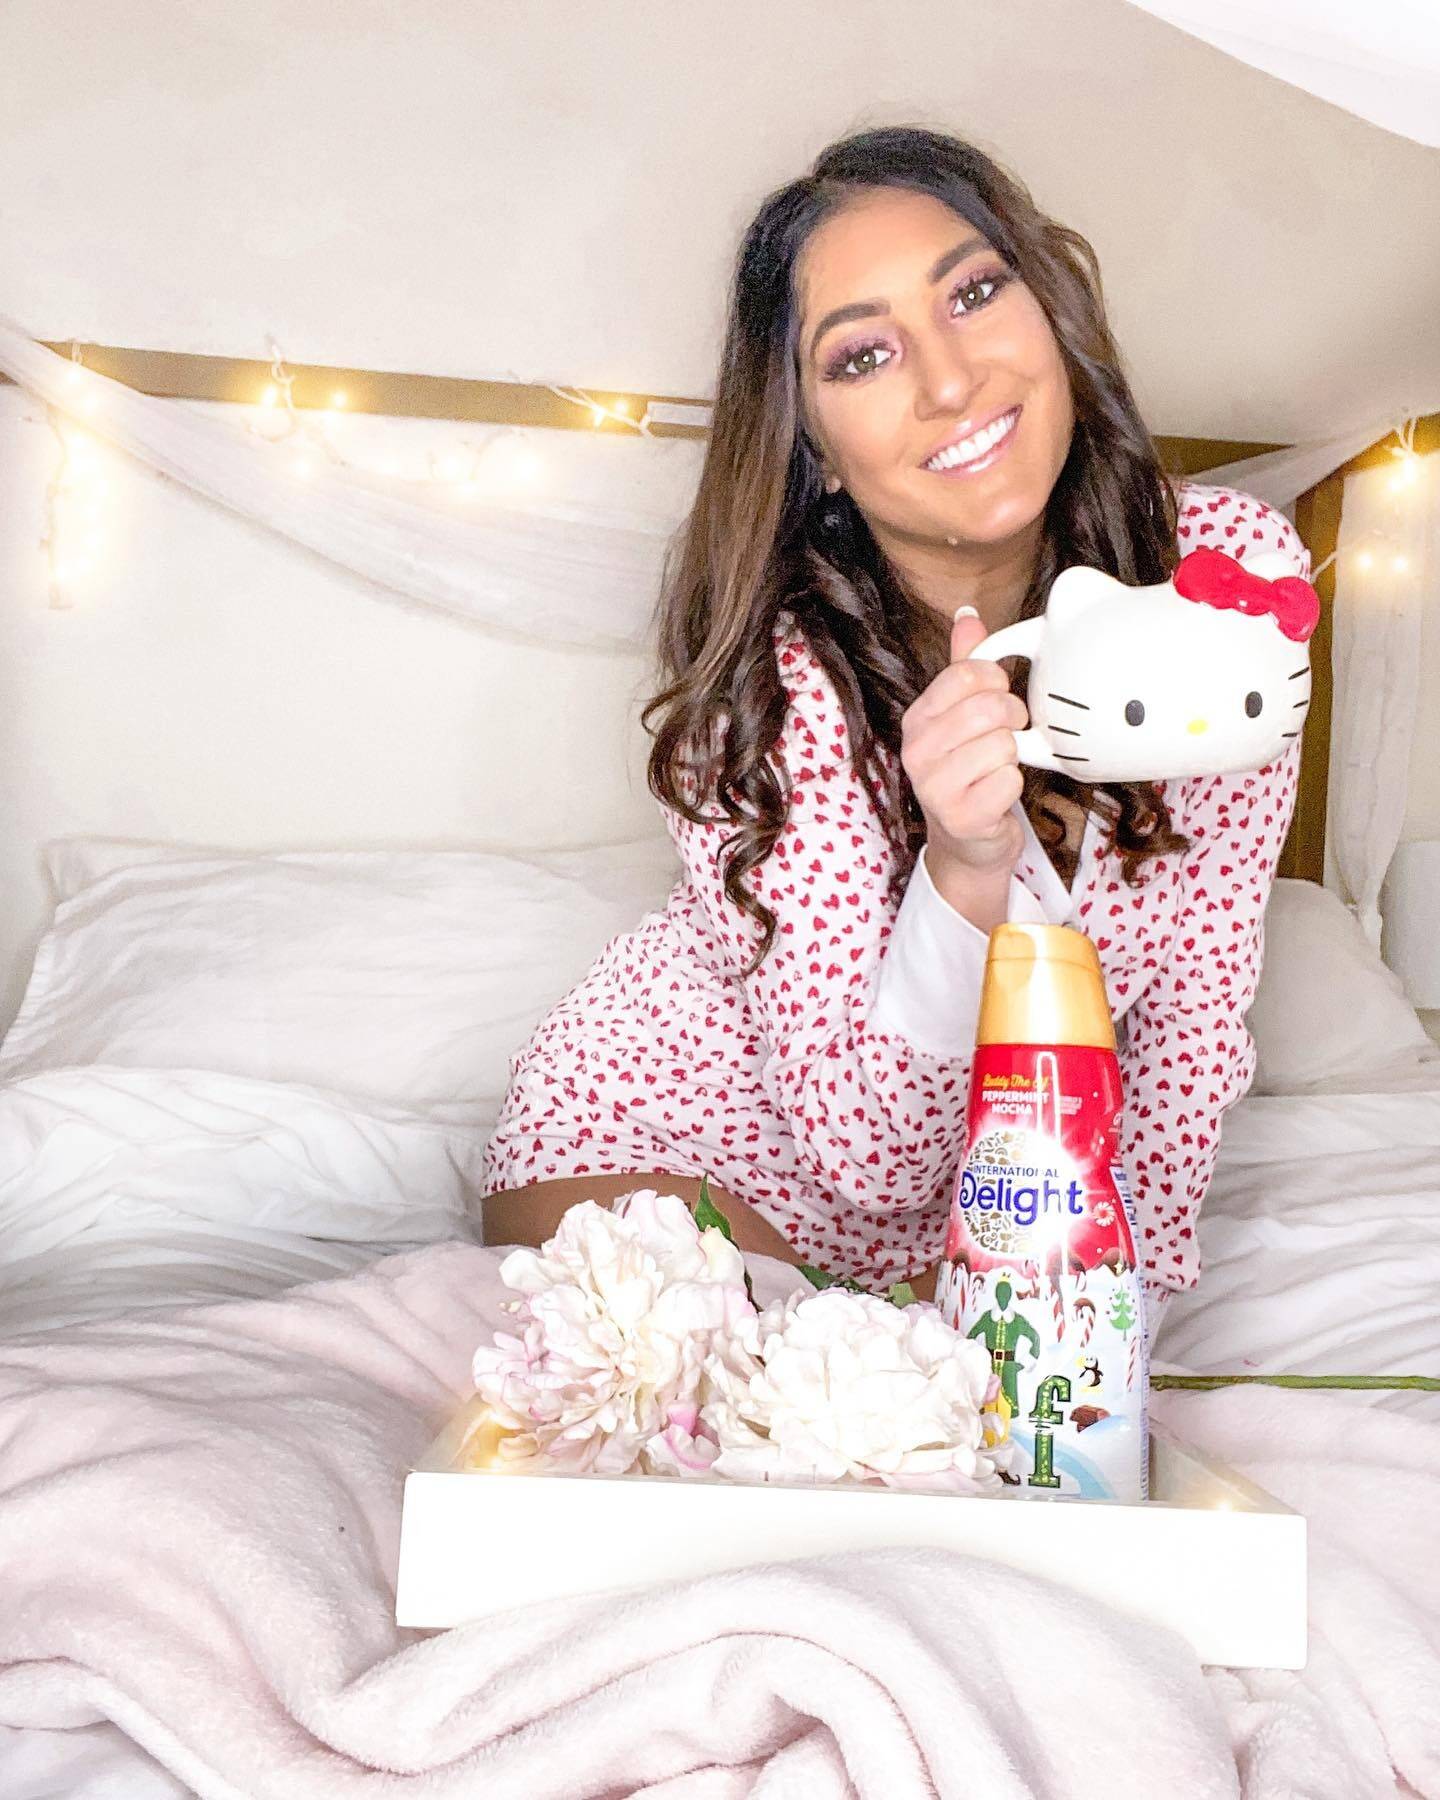 Coffee in bed on the weekends✔️ happy Saturday everyone !🥰❤️
.
.
#coffeelover #michiganblogger #breakfast #breakfastinbed #detroitbloggers #bed #pajamaday #hellokitty #coffeetime #coffeeaddict #victoriassecret #blogger #lifestyleblogger